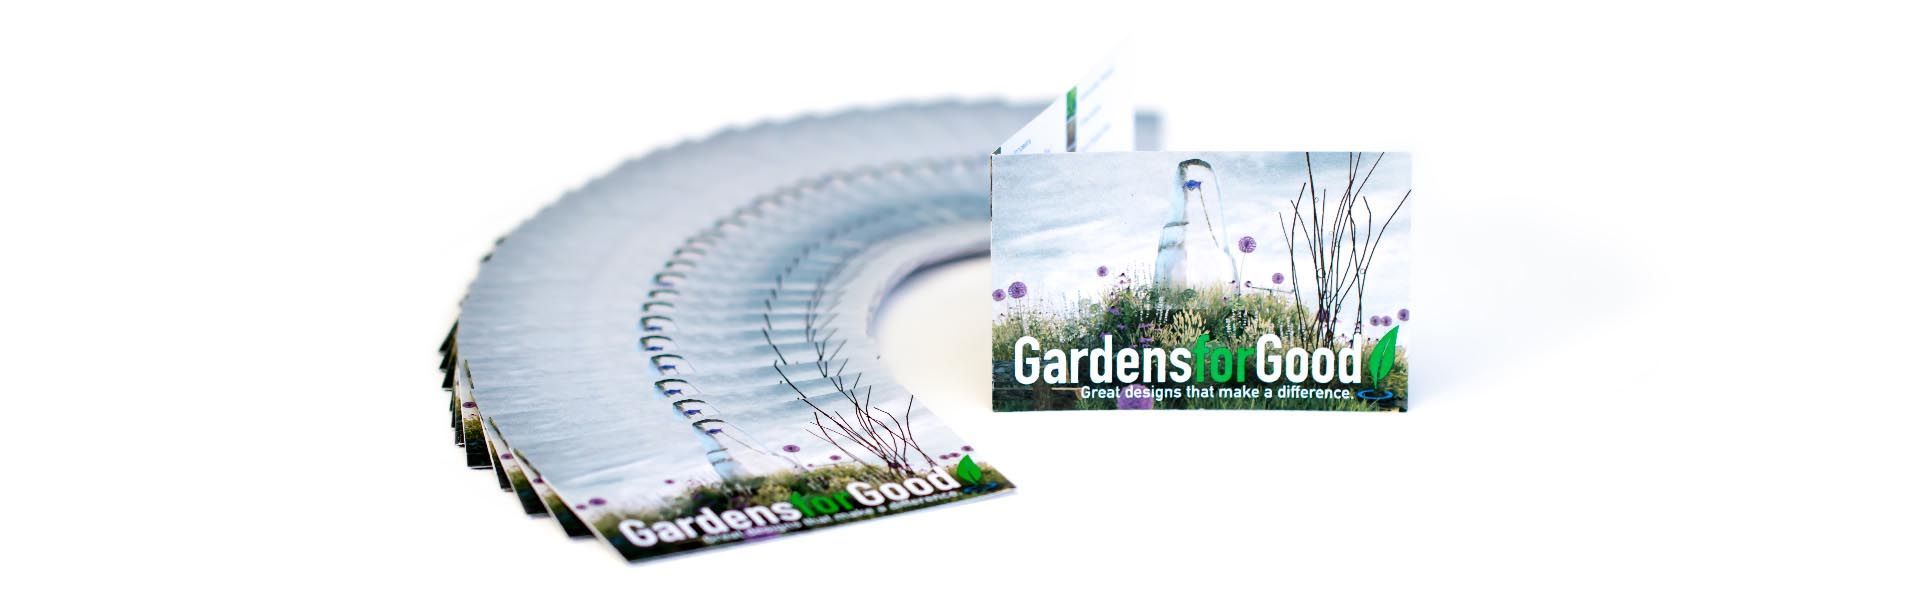 a stack of cards that say gardens for good